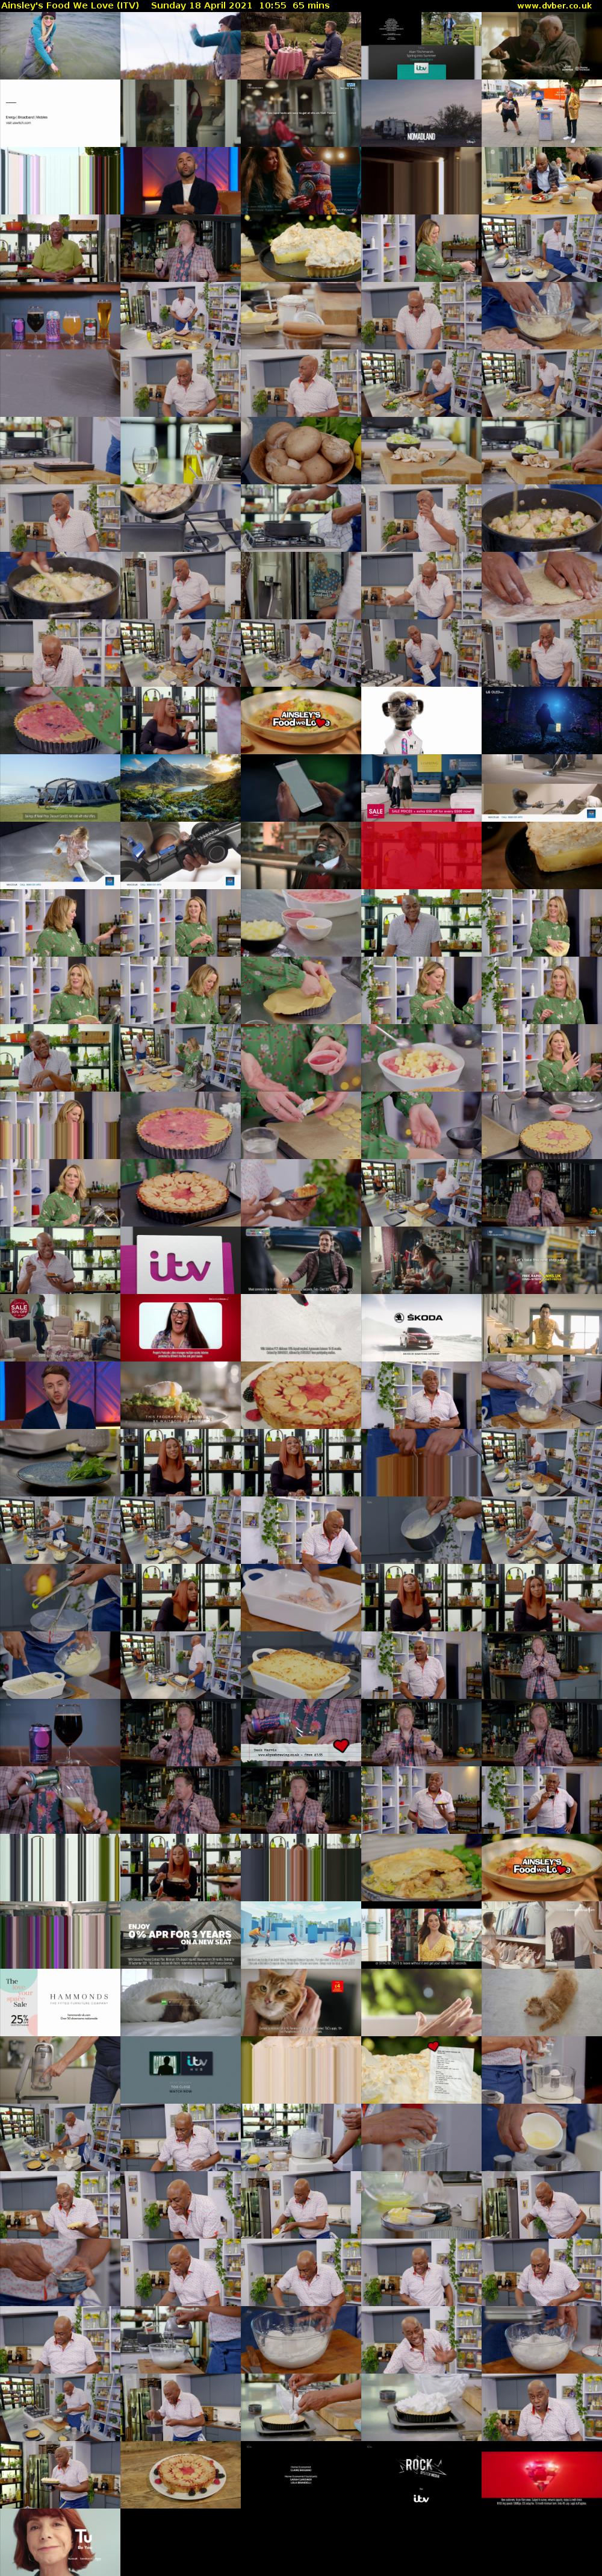 Ainsley's Food We Love (ITV) Sunday 18 April 2021 10:55 - 12:00